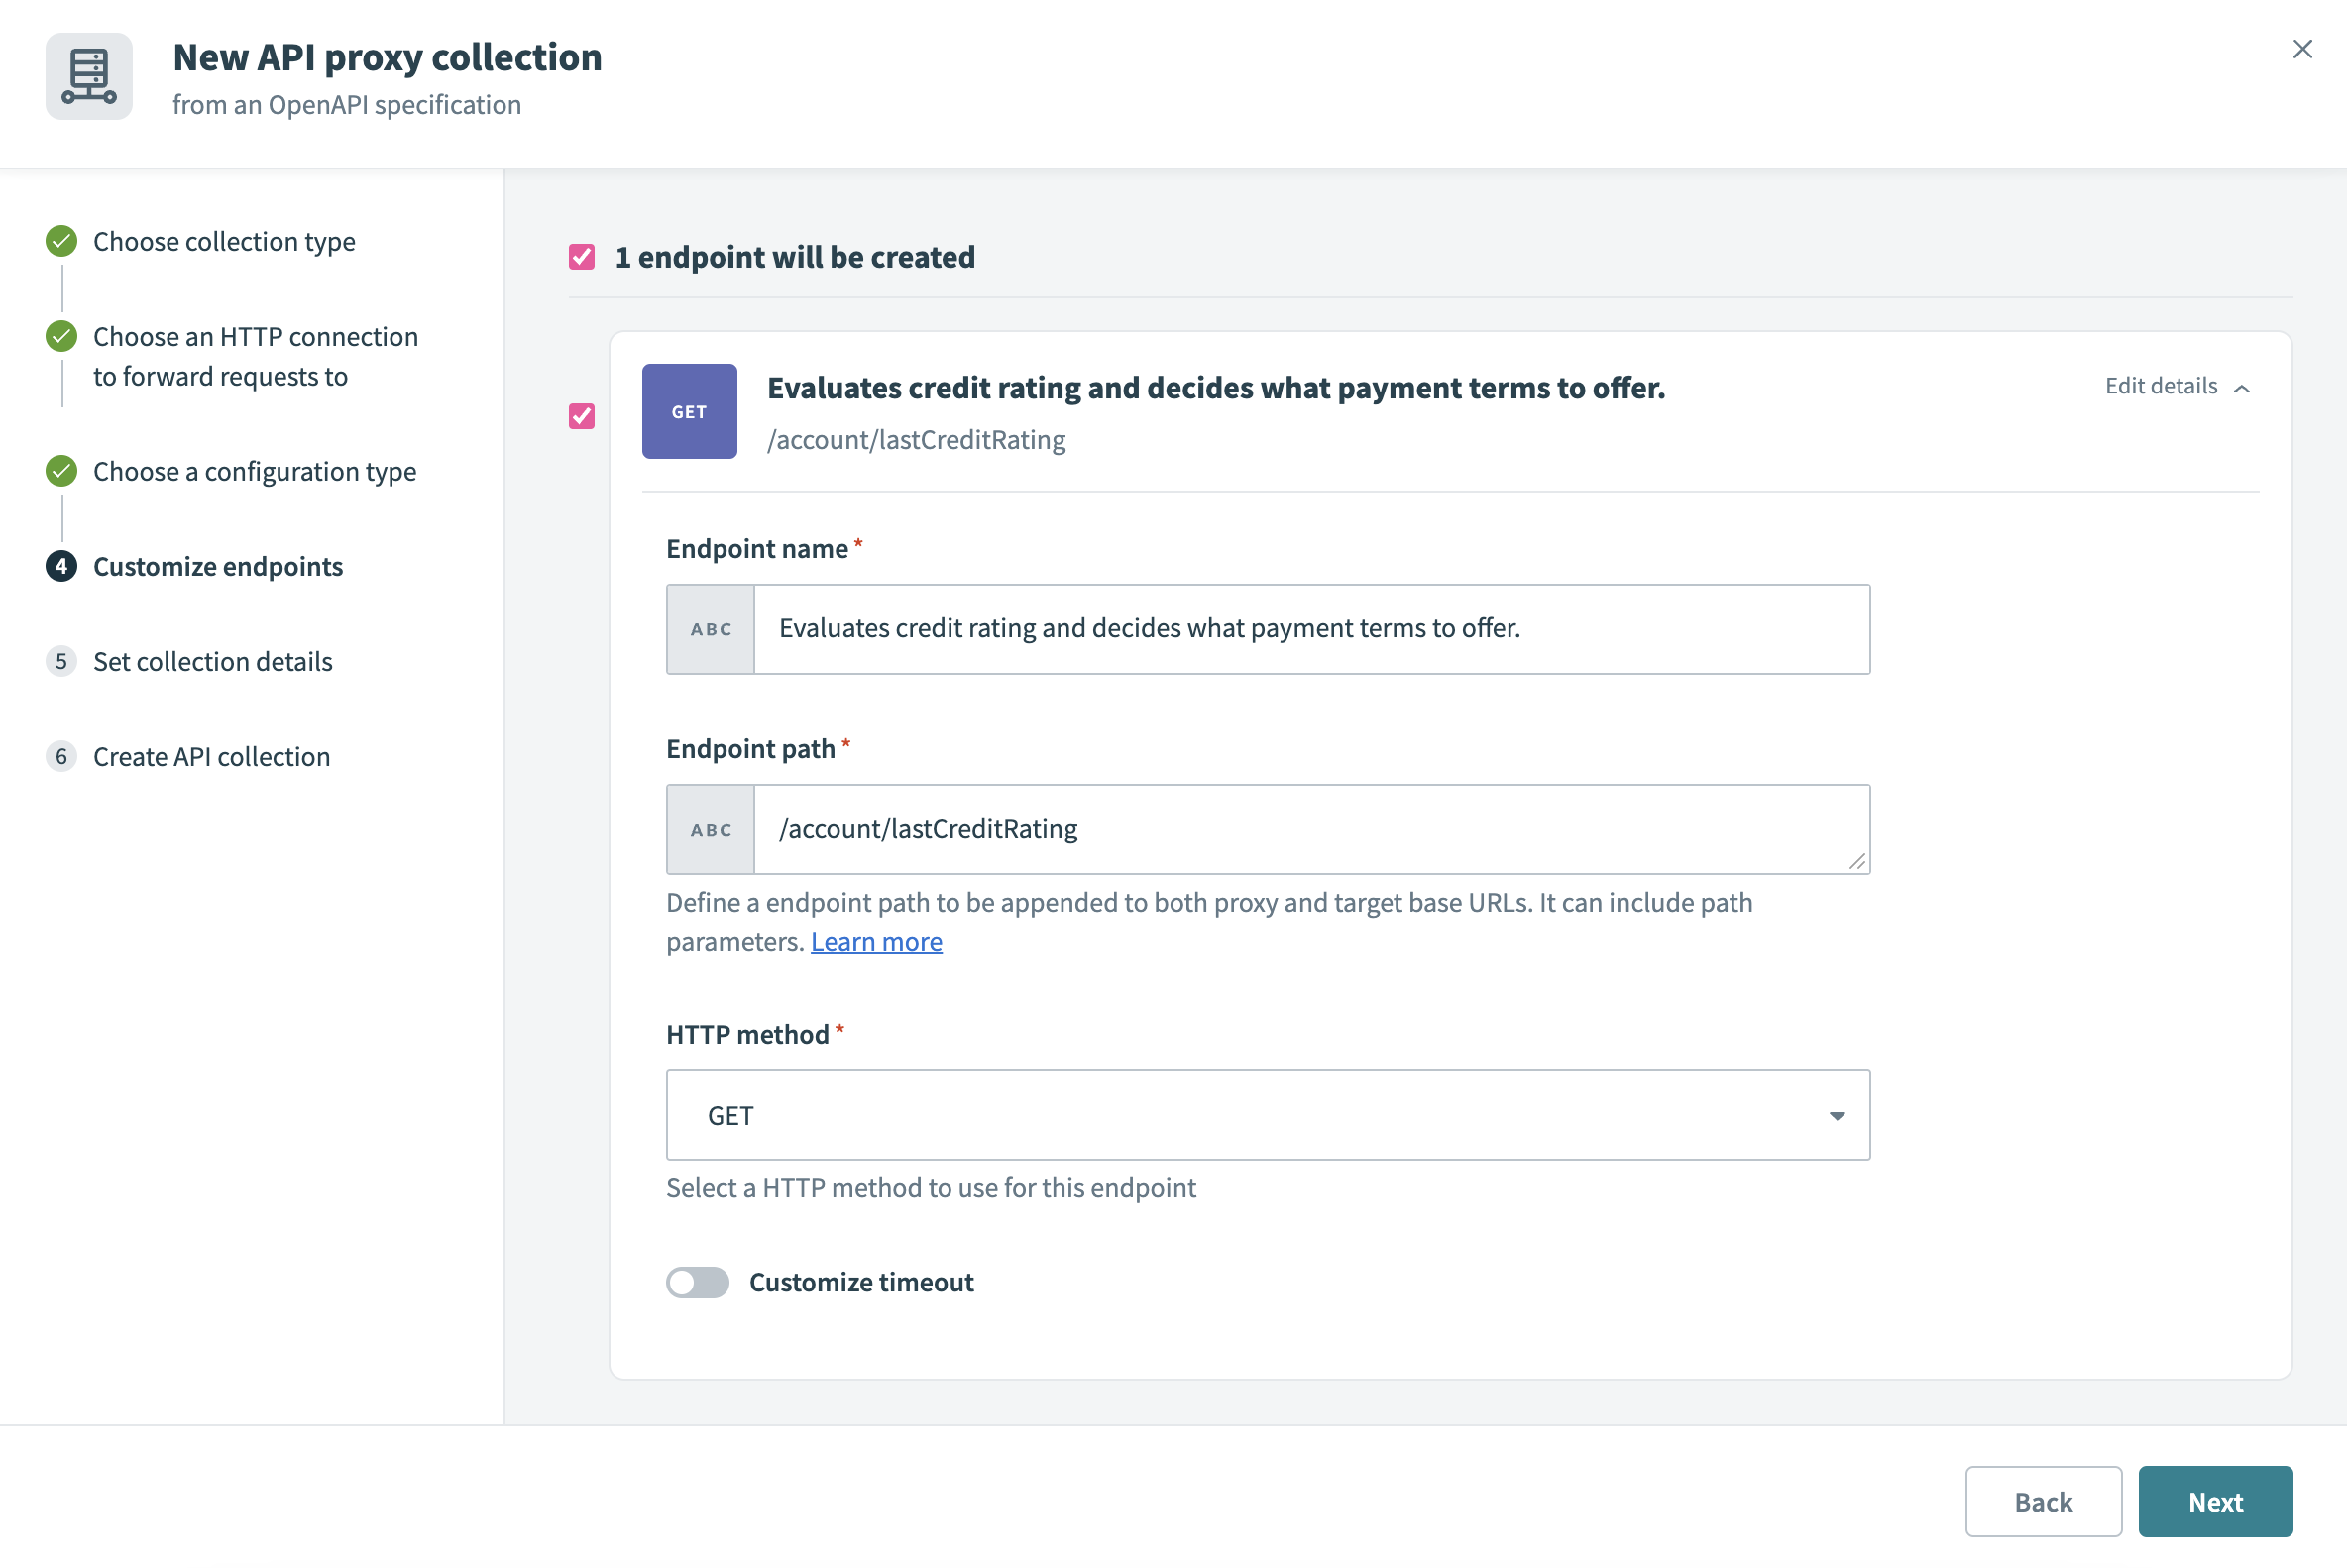 Customize API proxy collection endpoints